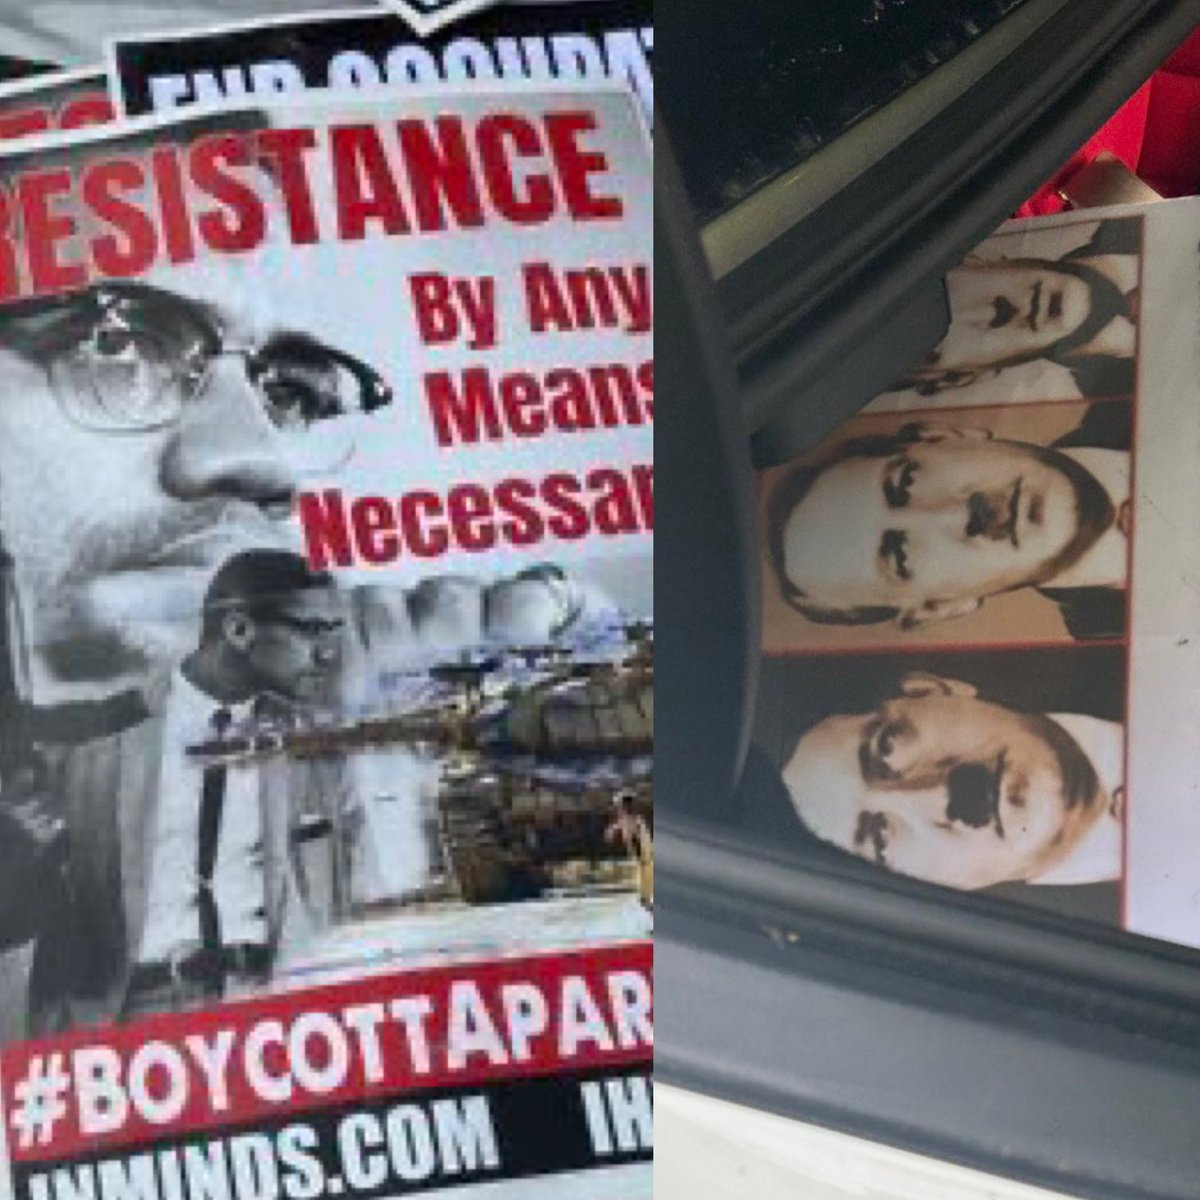 The @metpoliceuk have allowed an Islamic Republic of Iran-backed march today for Al Quds day through streets of London. Placards included: “Resistance by Any Means Necessary” Also found were pictures of Hitler on a baby seat in the back of a car. Via @IncMonocle (follow for